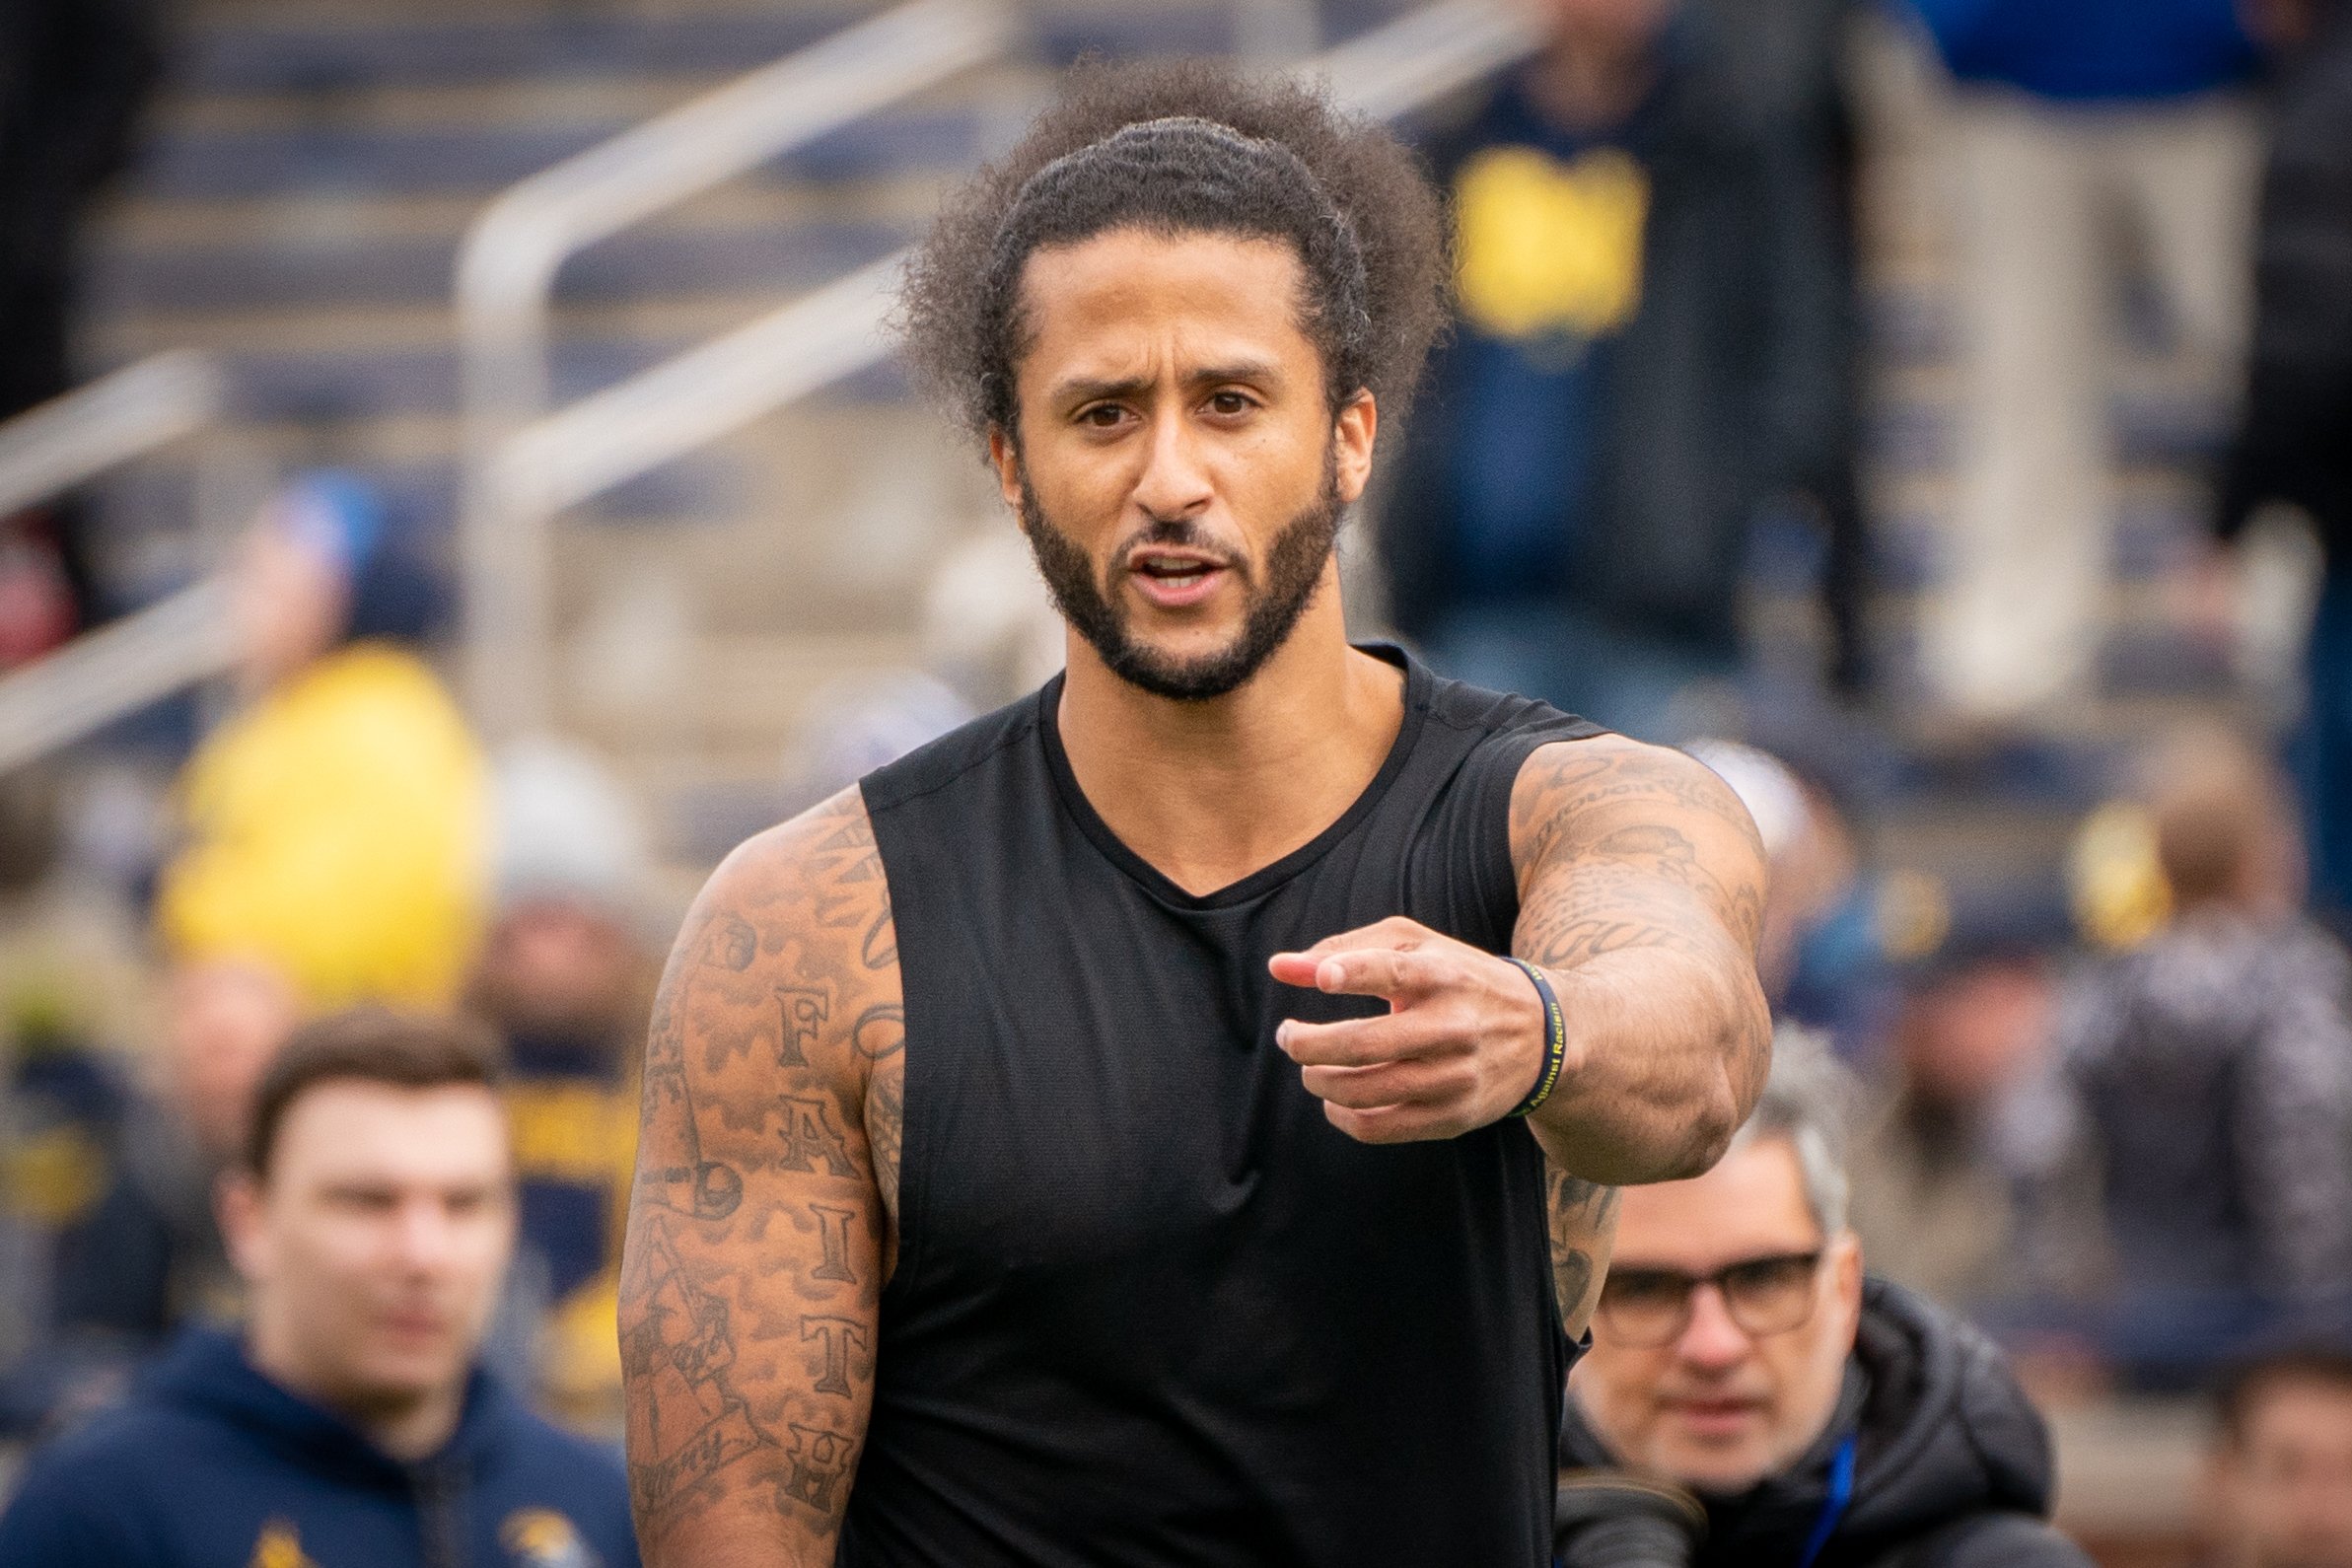 Colin Kaepernick photographed as he participates in a throwing exhibition d...